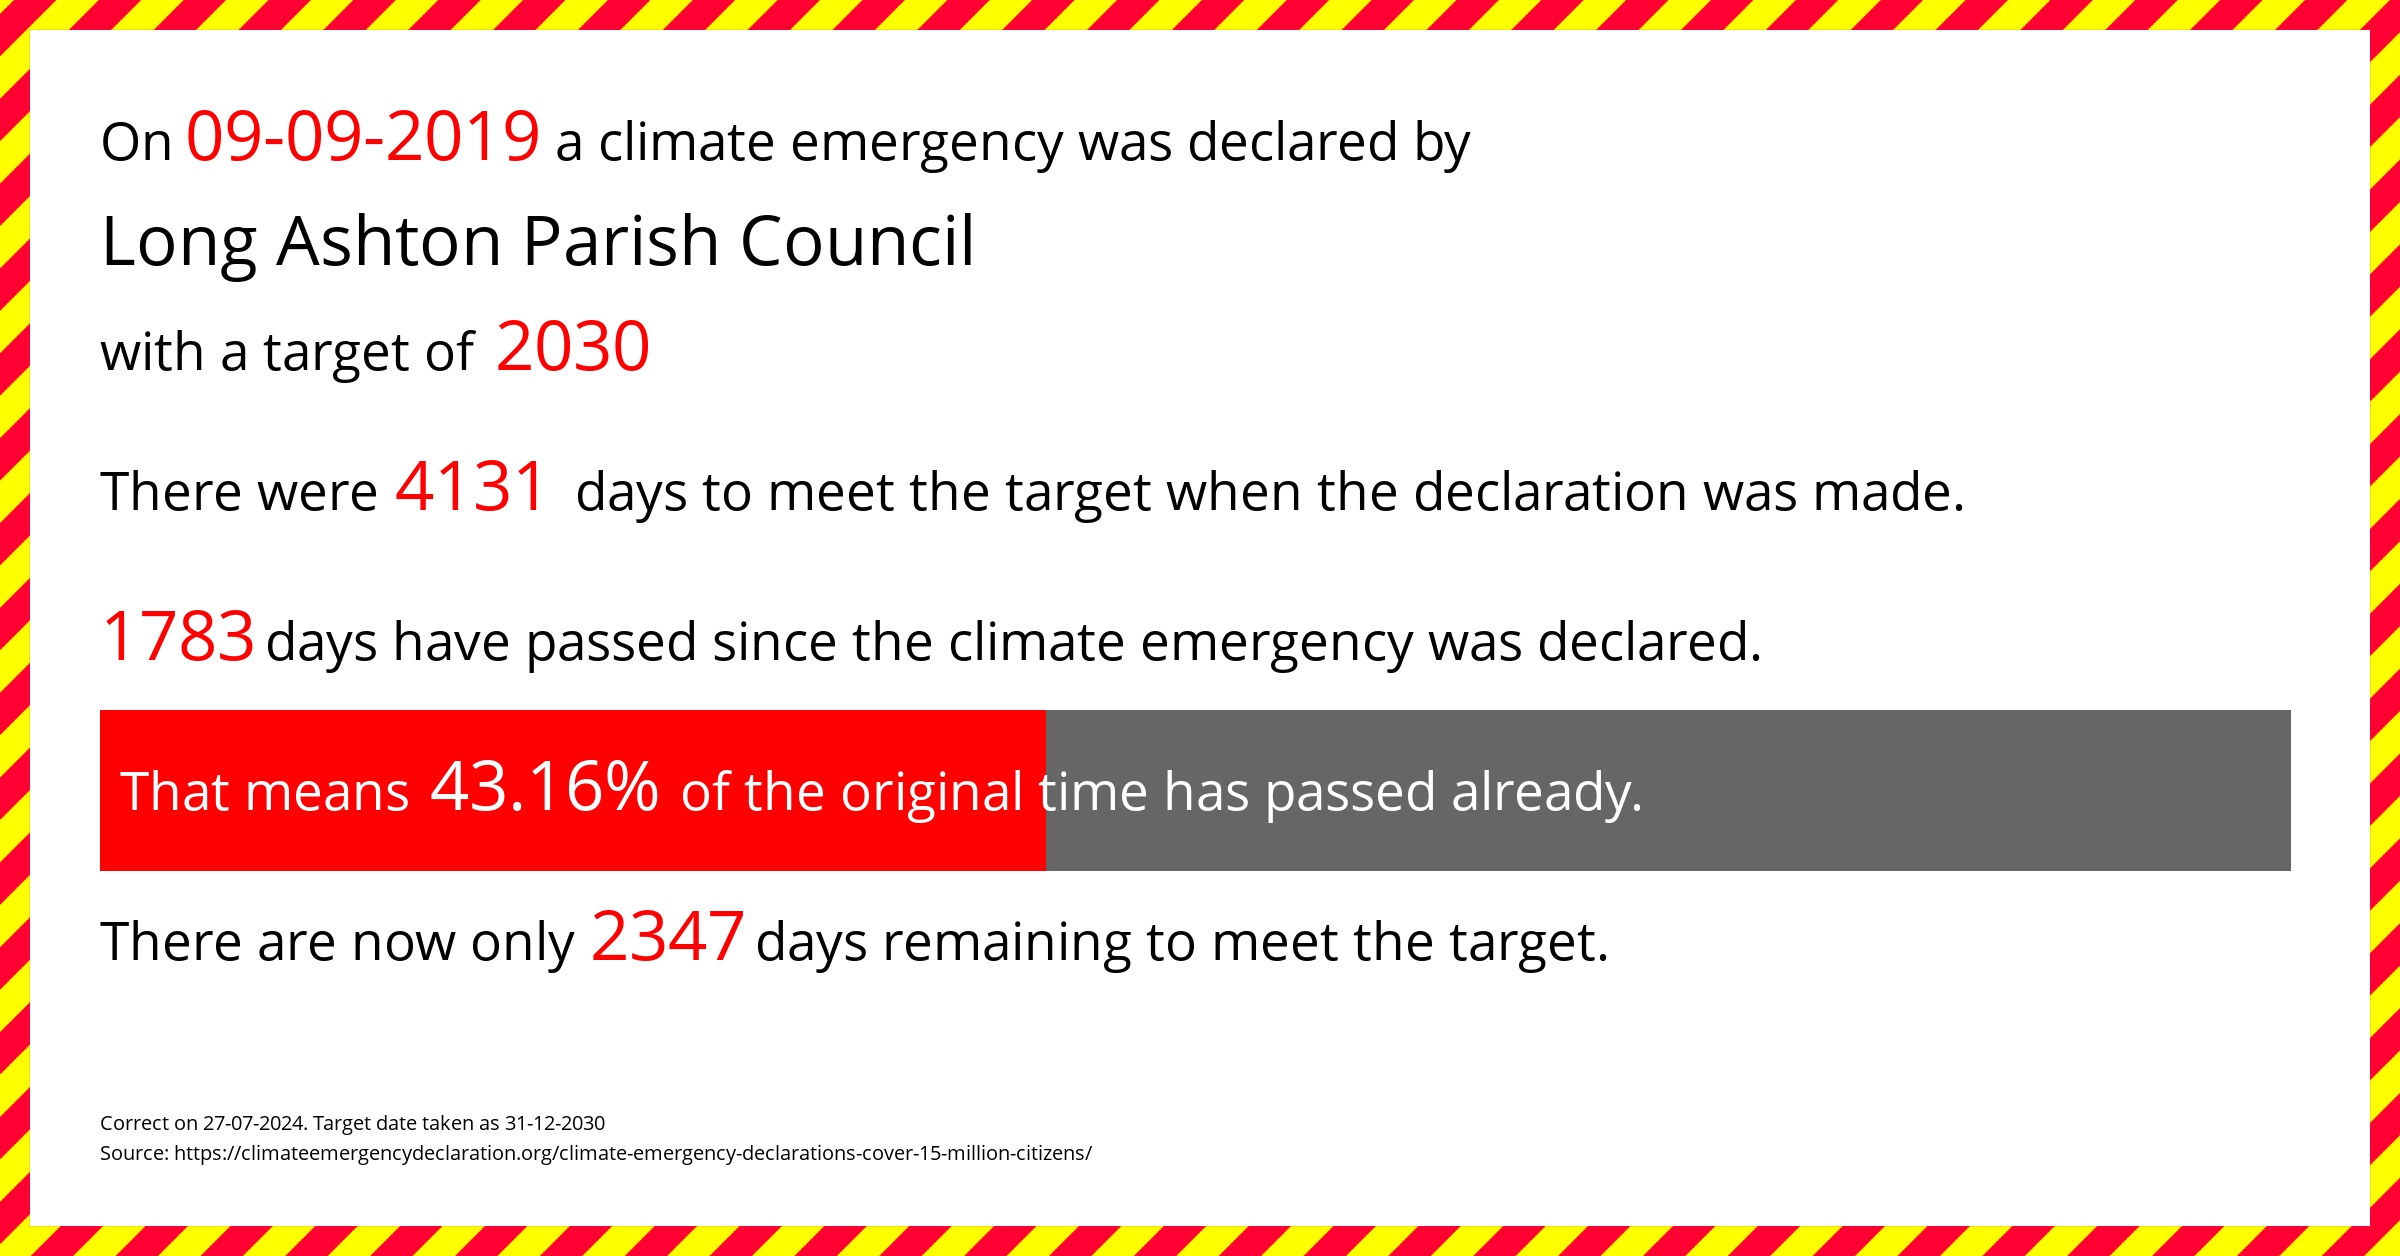 Long Ashton Parish Council declared a Climate emergency on Monday 9th September 2019, with a target of 2030.